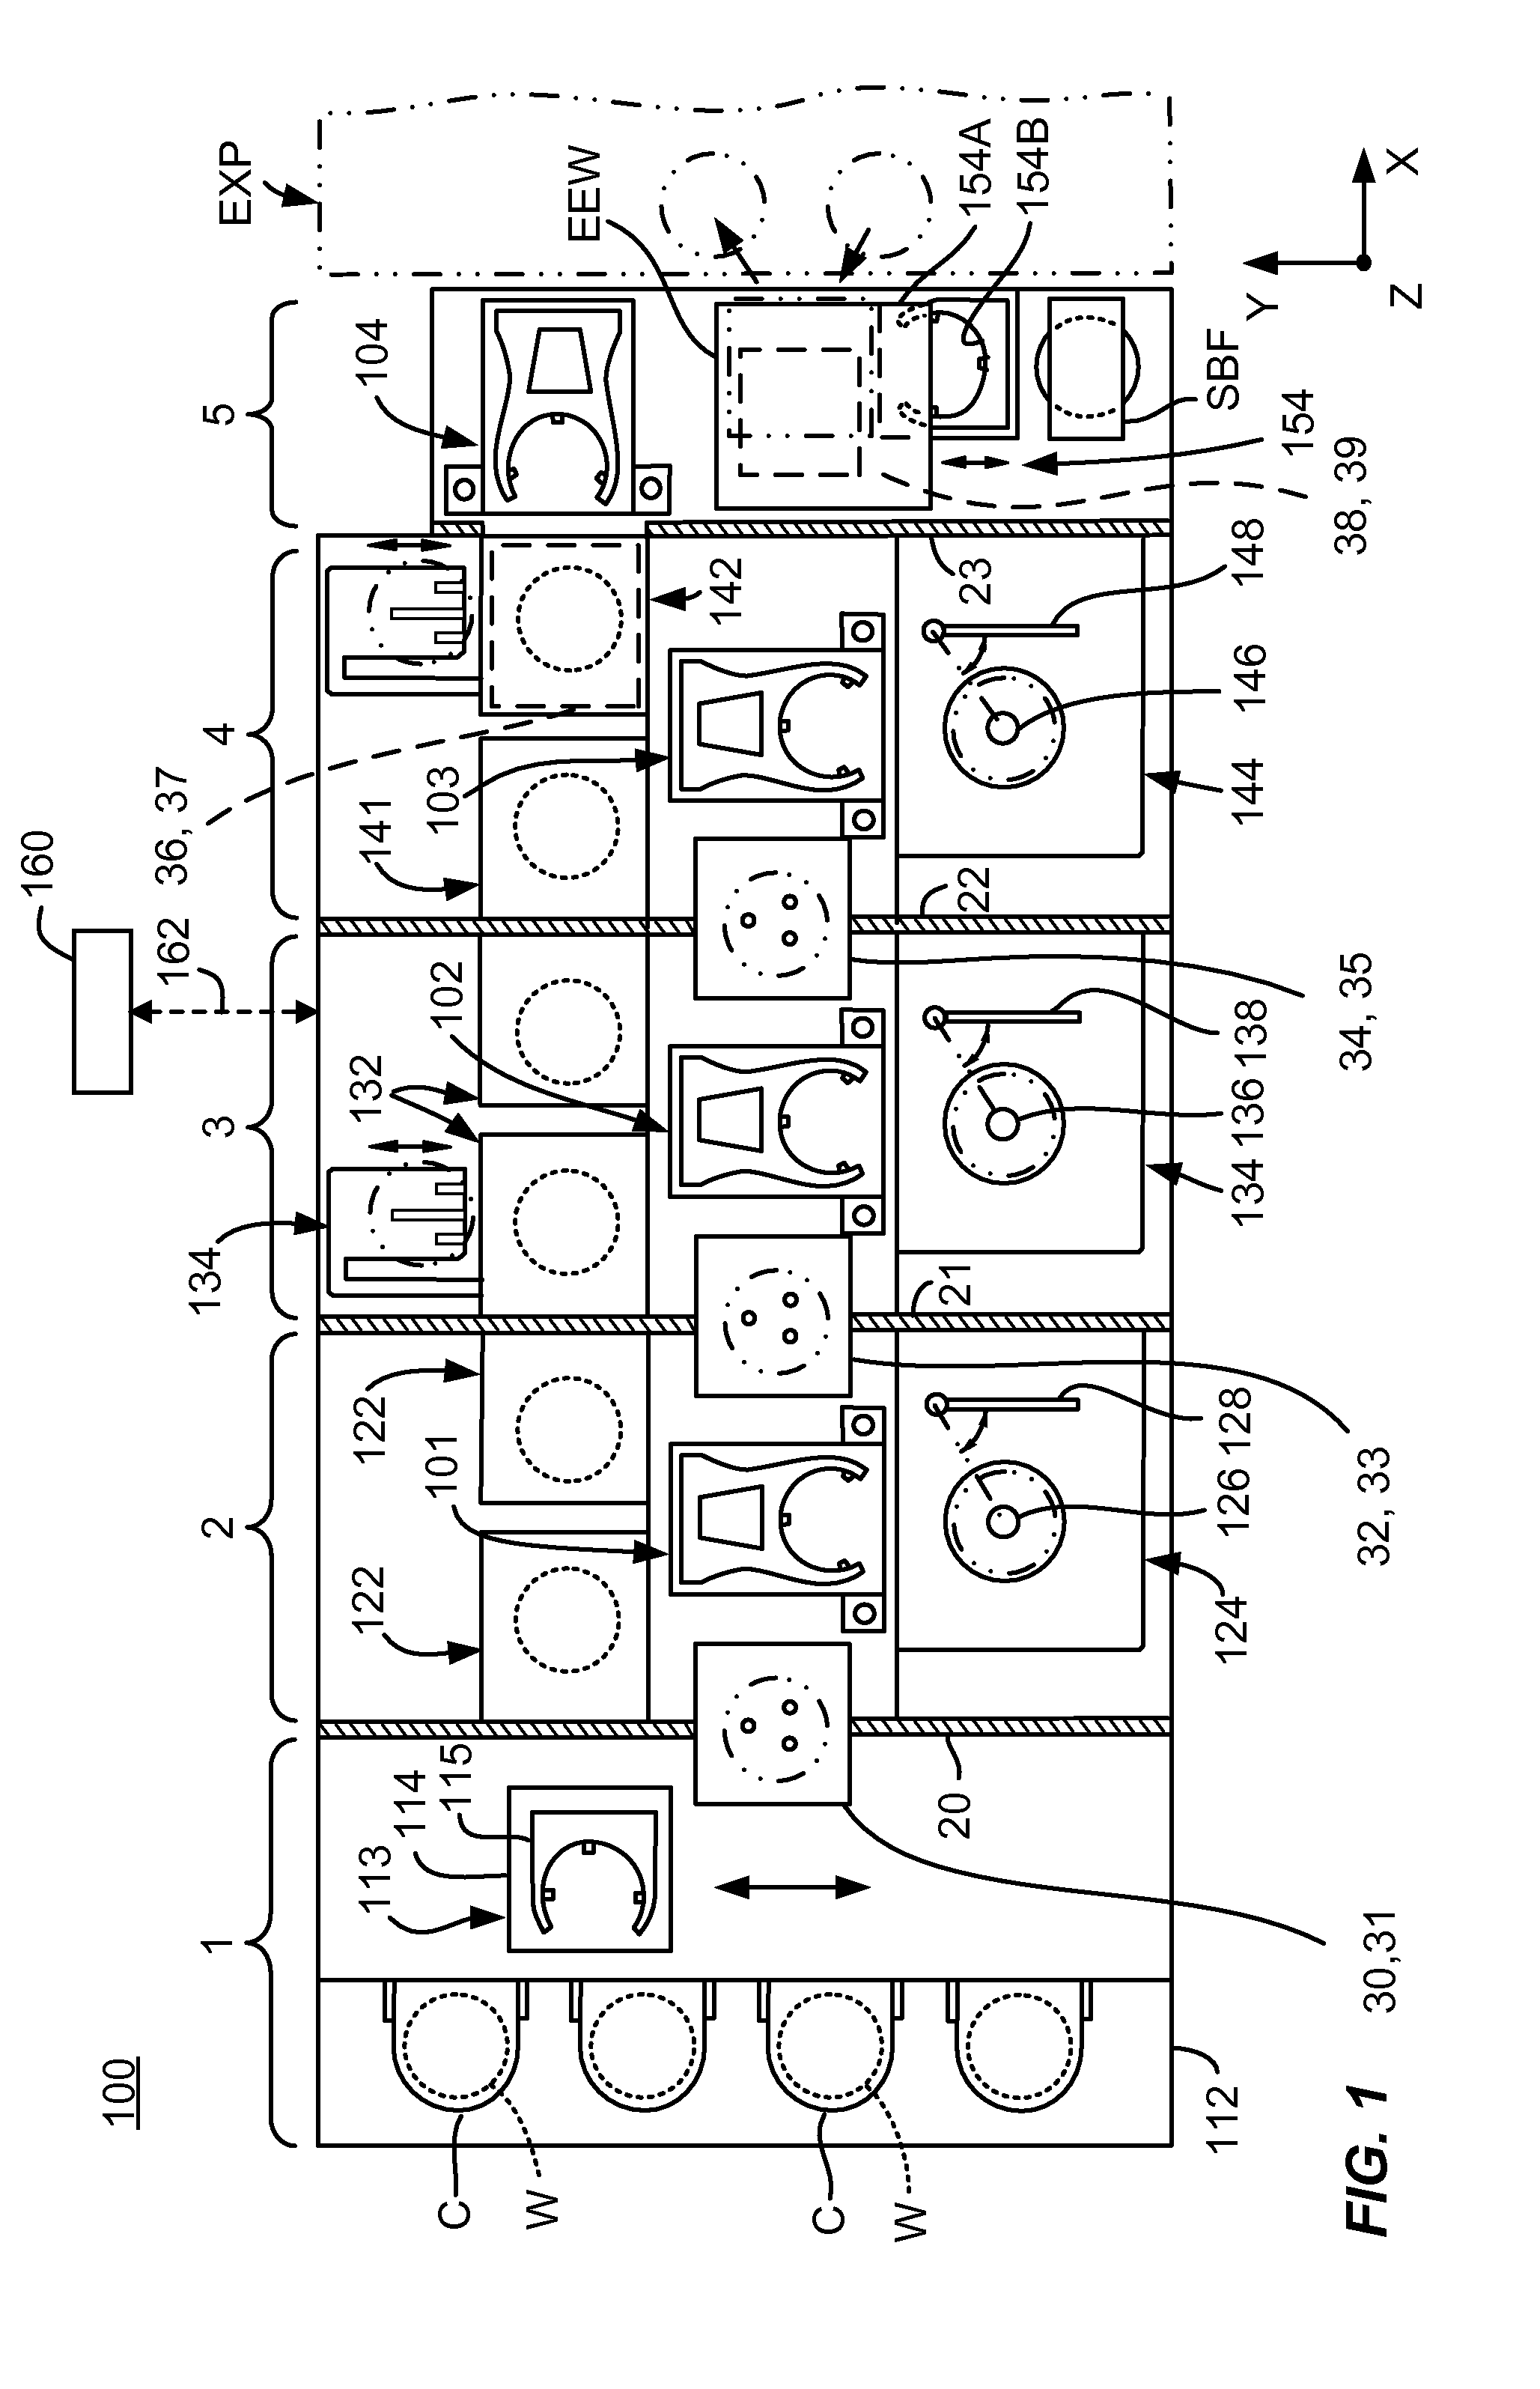 Methods and systems for controlling critical dimensions in track lithography tools